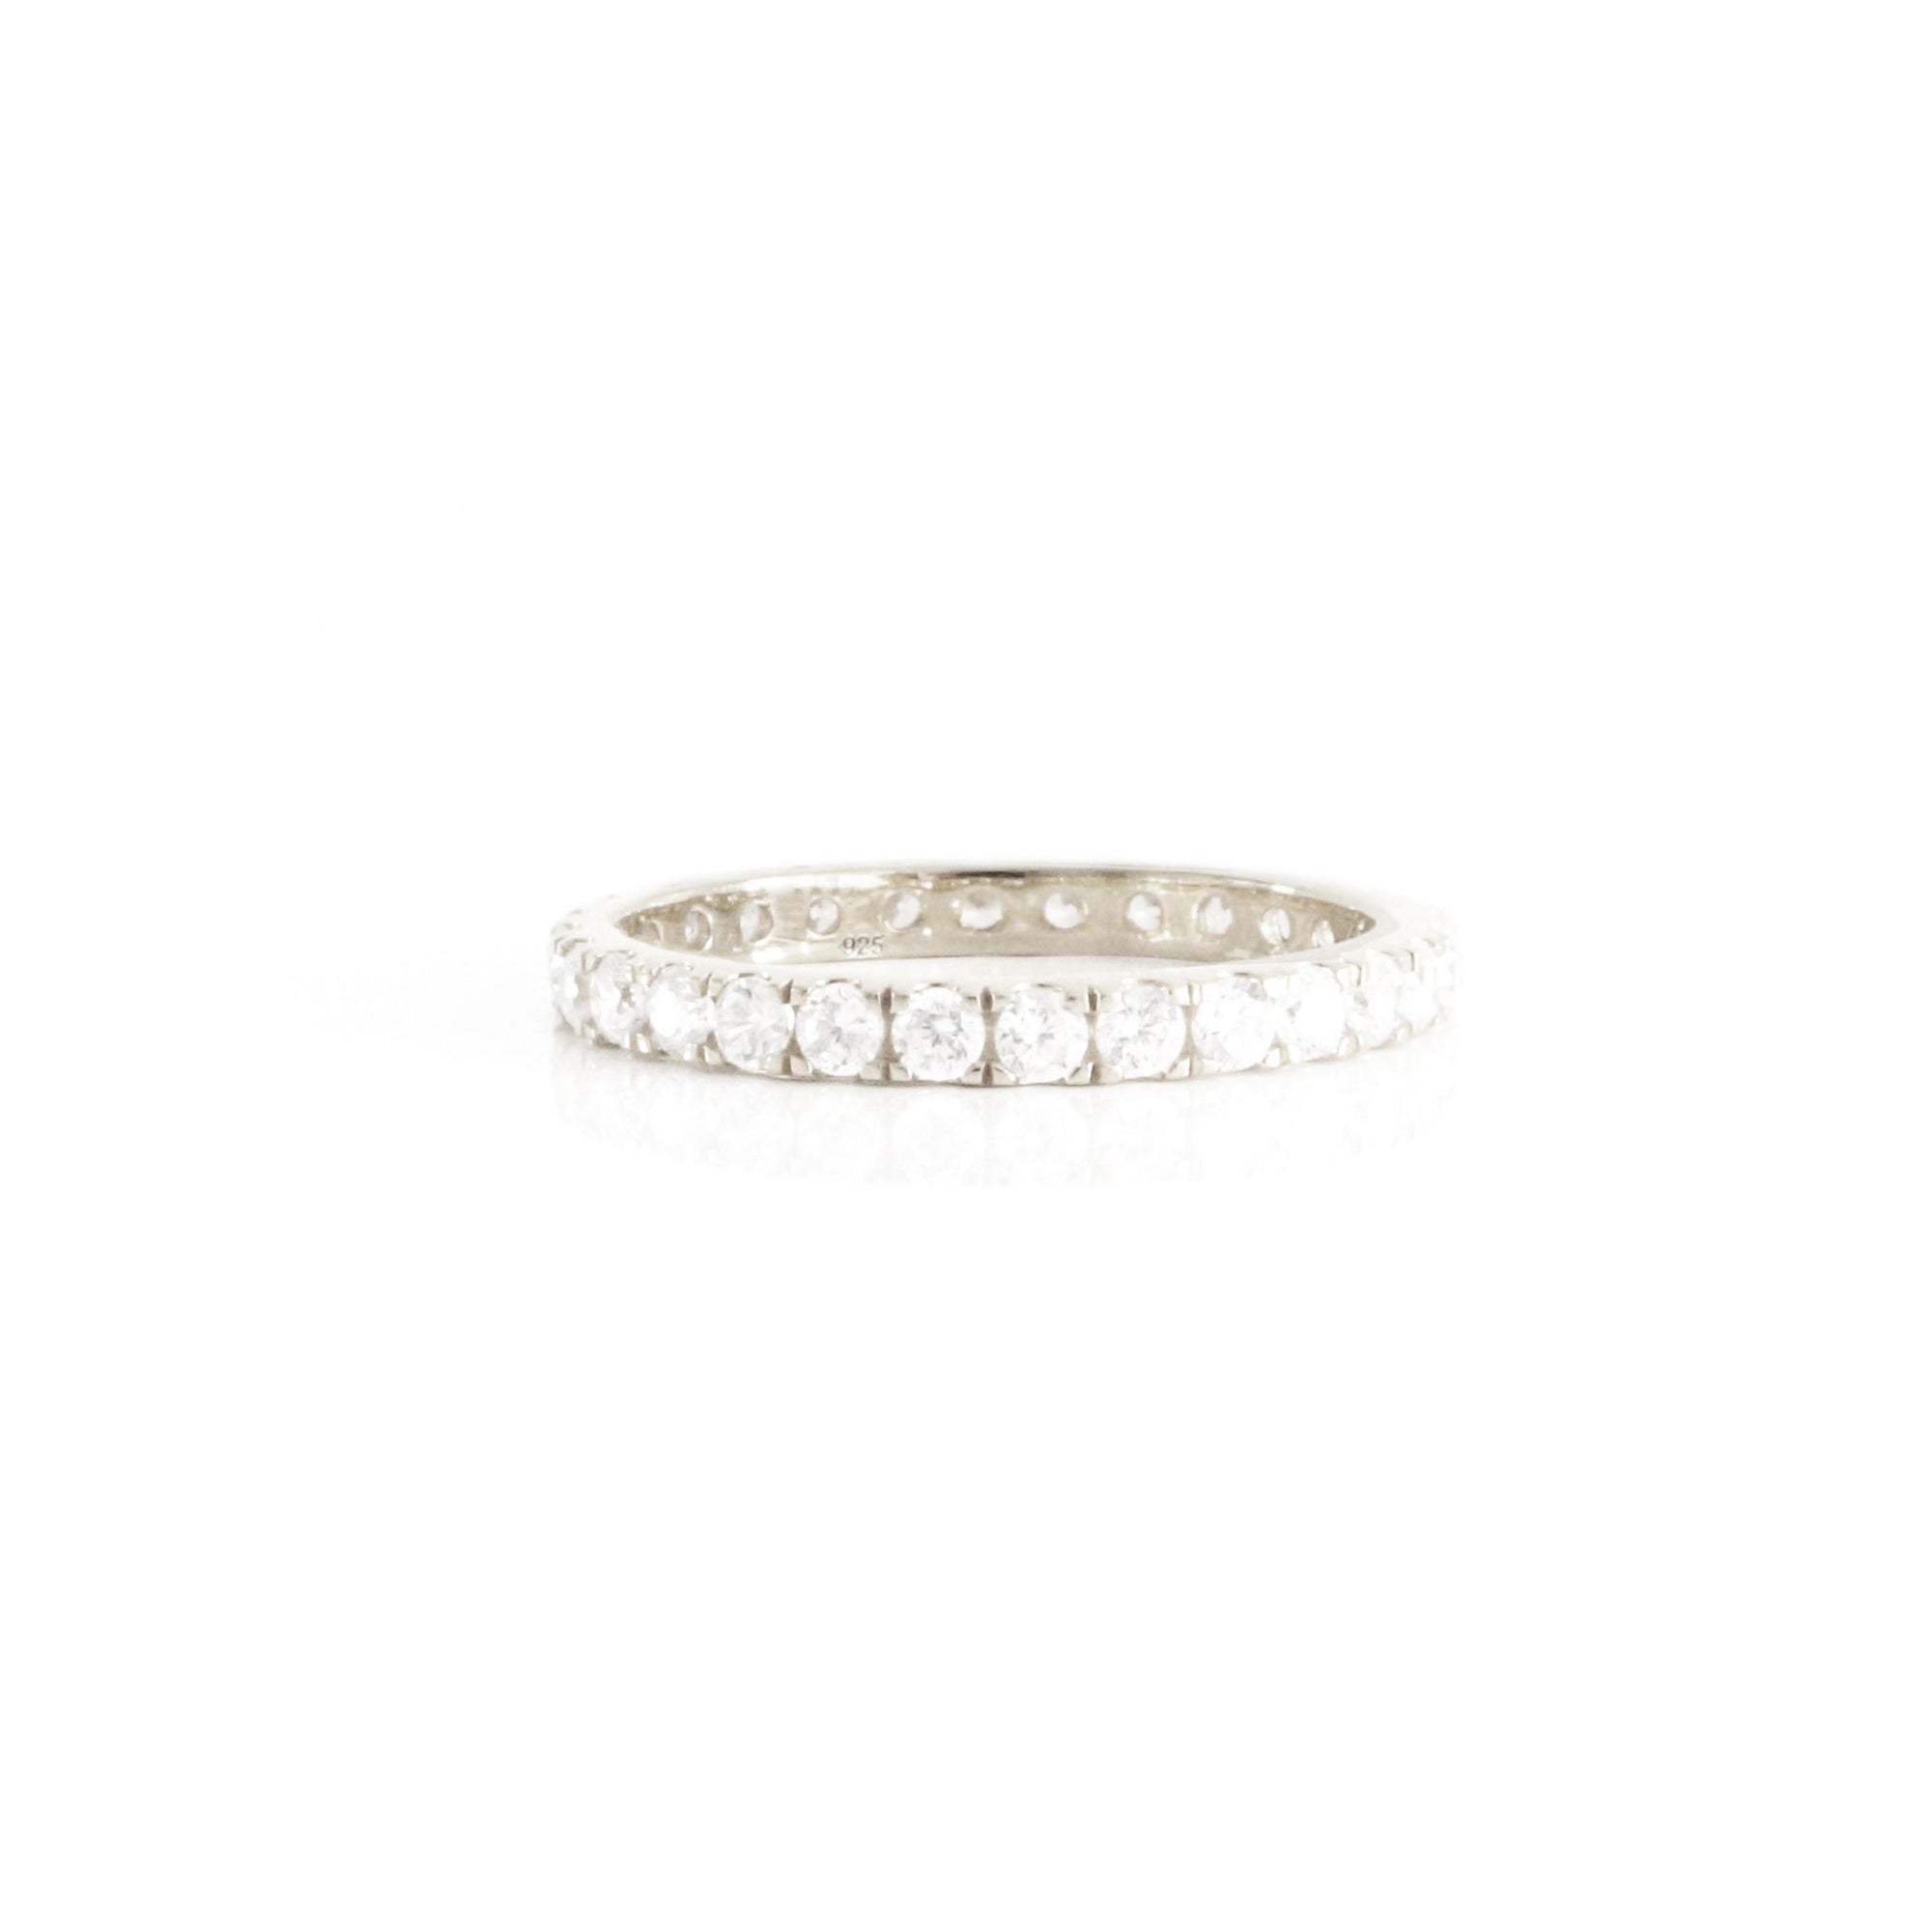 LOVE ETERNITY BAND - CUBIC ZIRCONIA & SILVER - SO PRETTY CARA COTTER